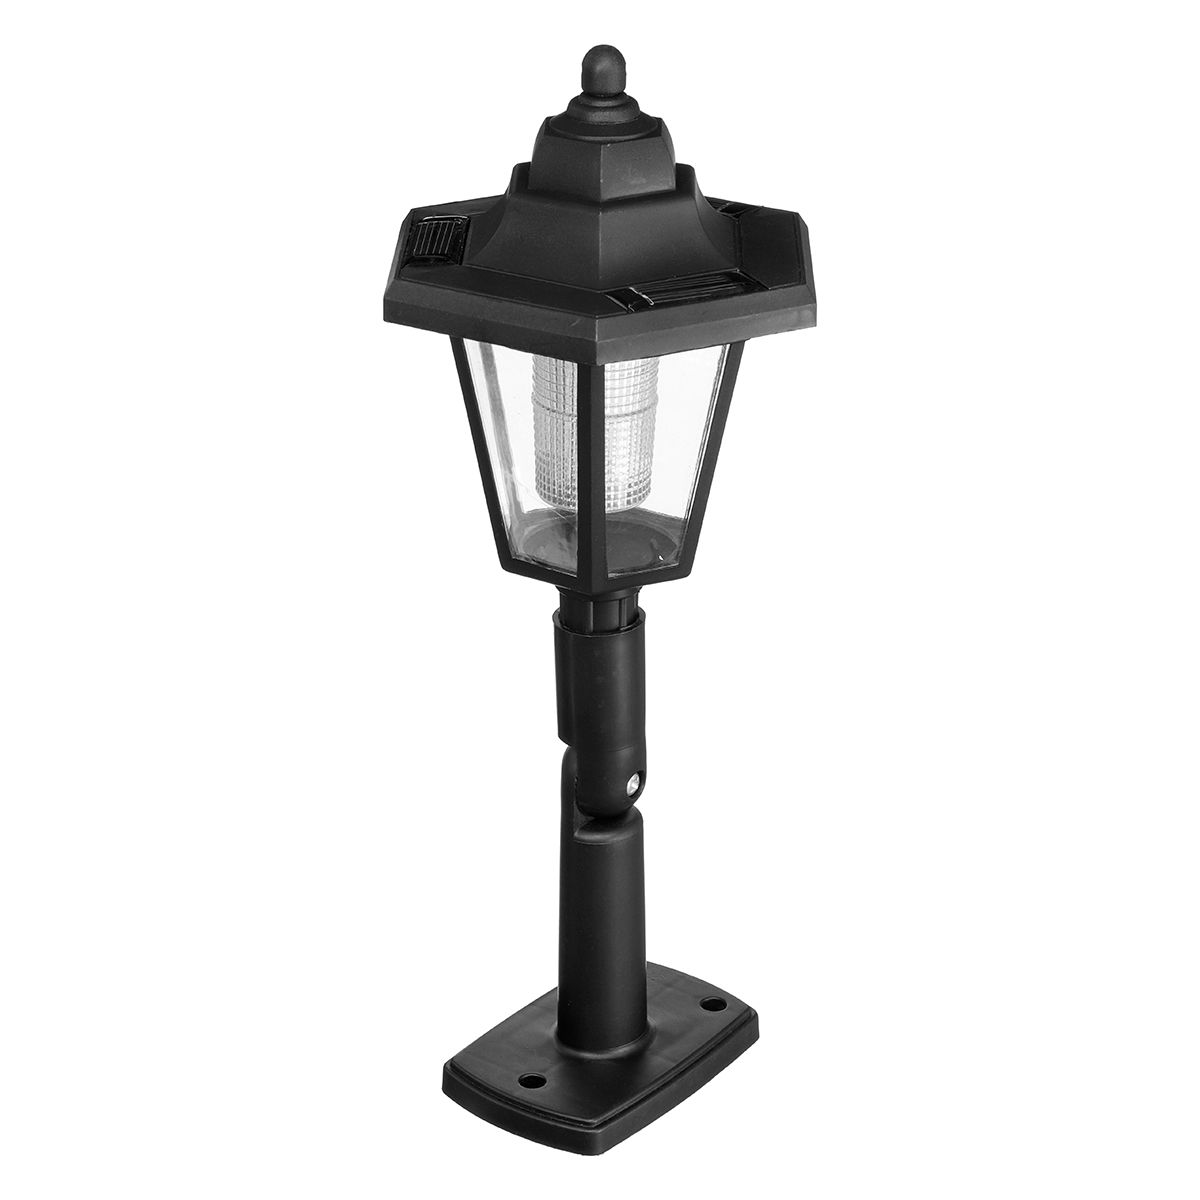 Outdoor-Garden-LED-Solar-Power-Path-Wall-Light-Lawn-Landscape-Security-Lamp-1633912